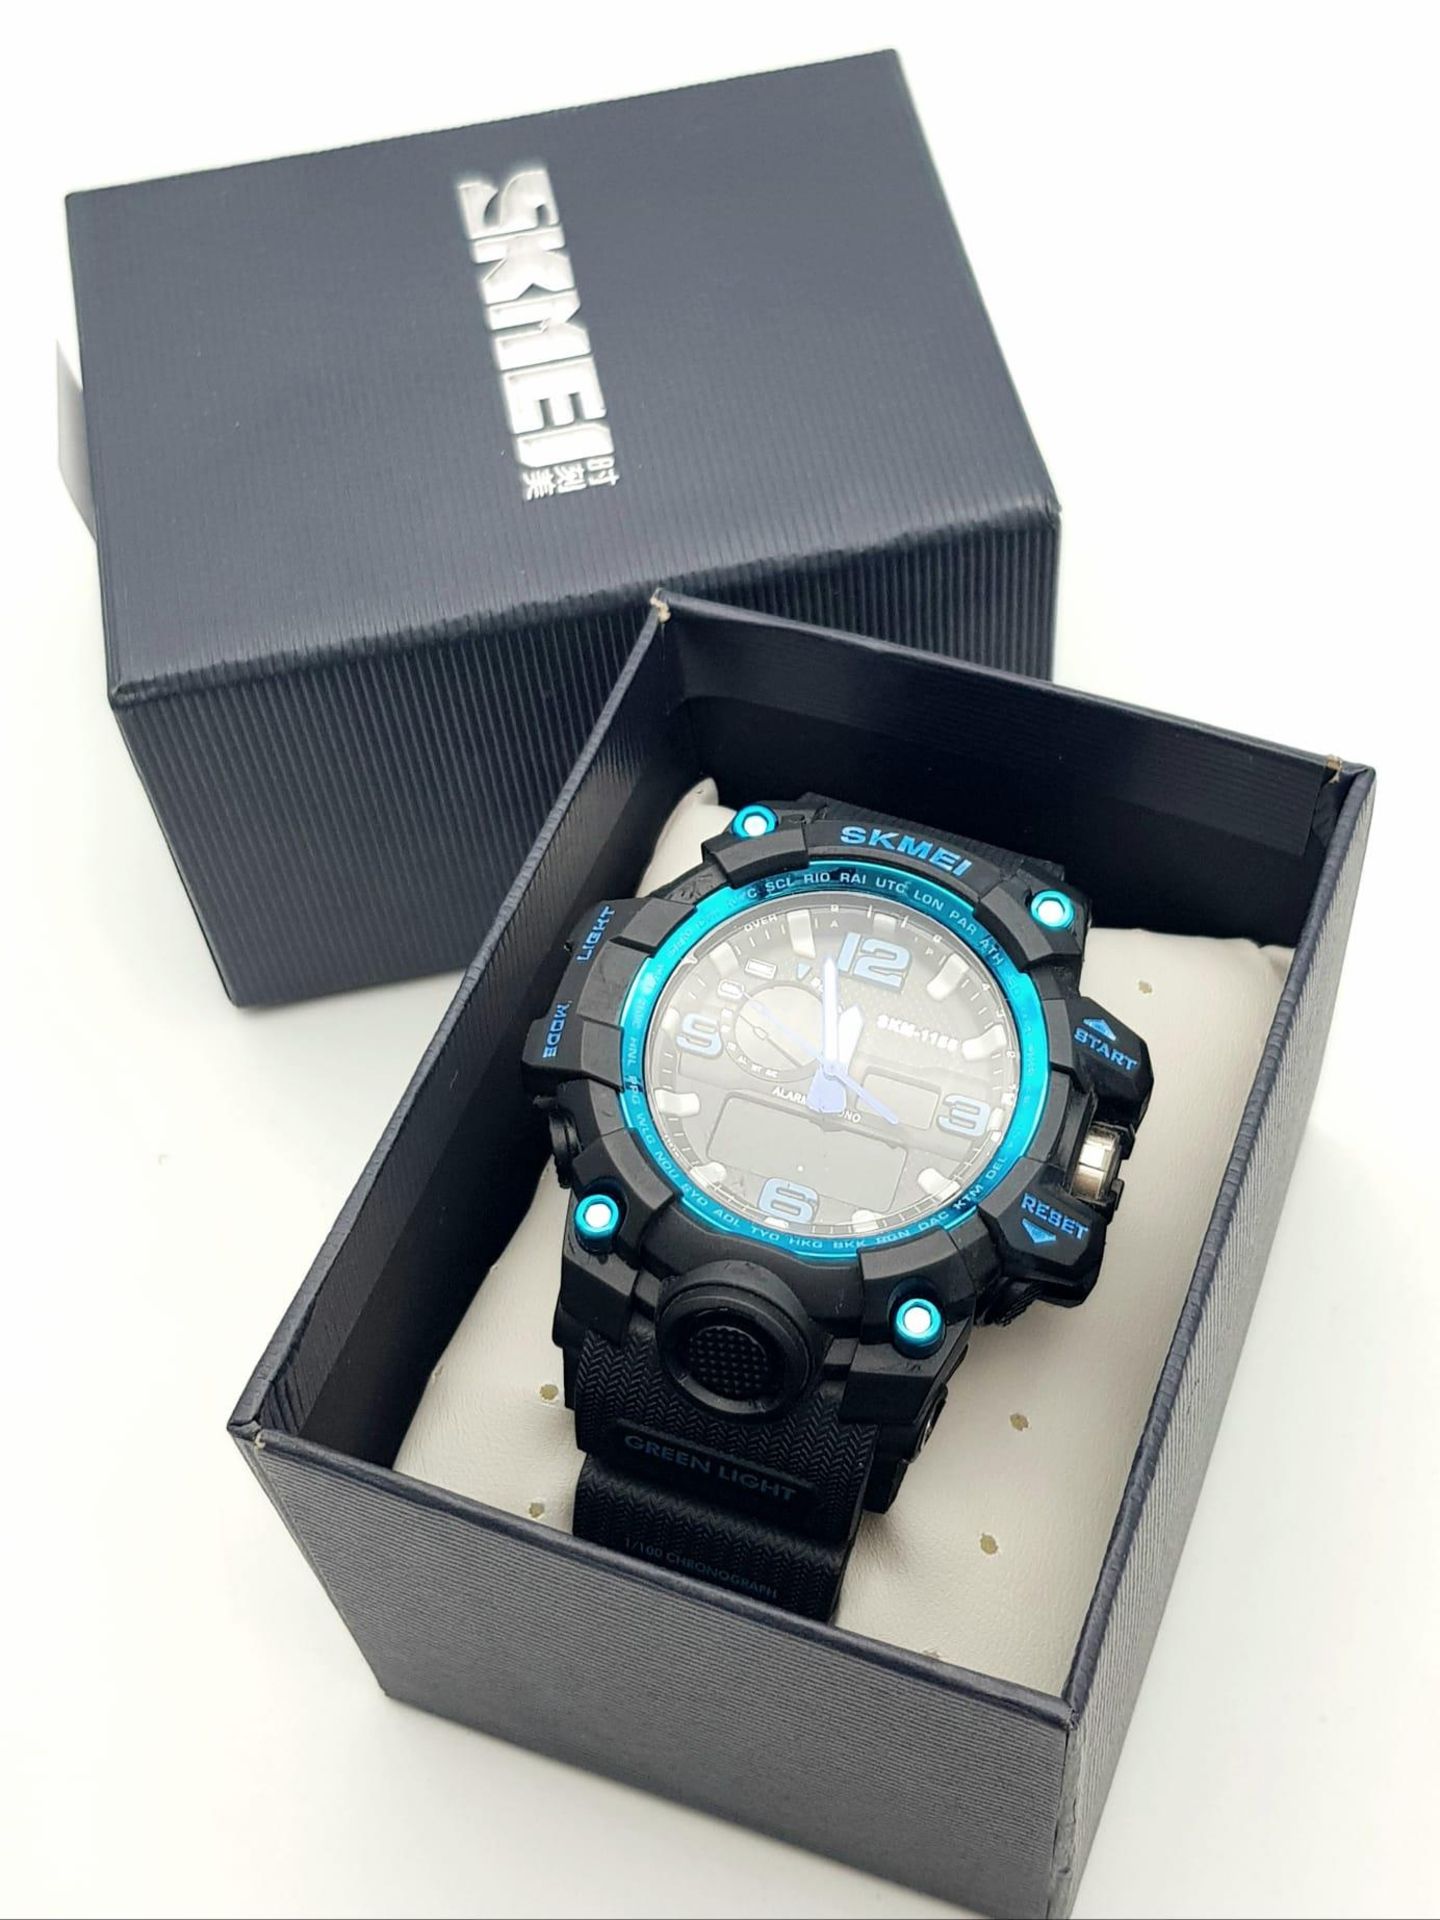 A Digital and Analogue Sports Watch by Skmei. Comes with Boxed and with Tags. Full Working Order. - Bild 6 aus 6